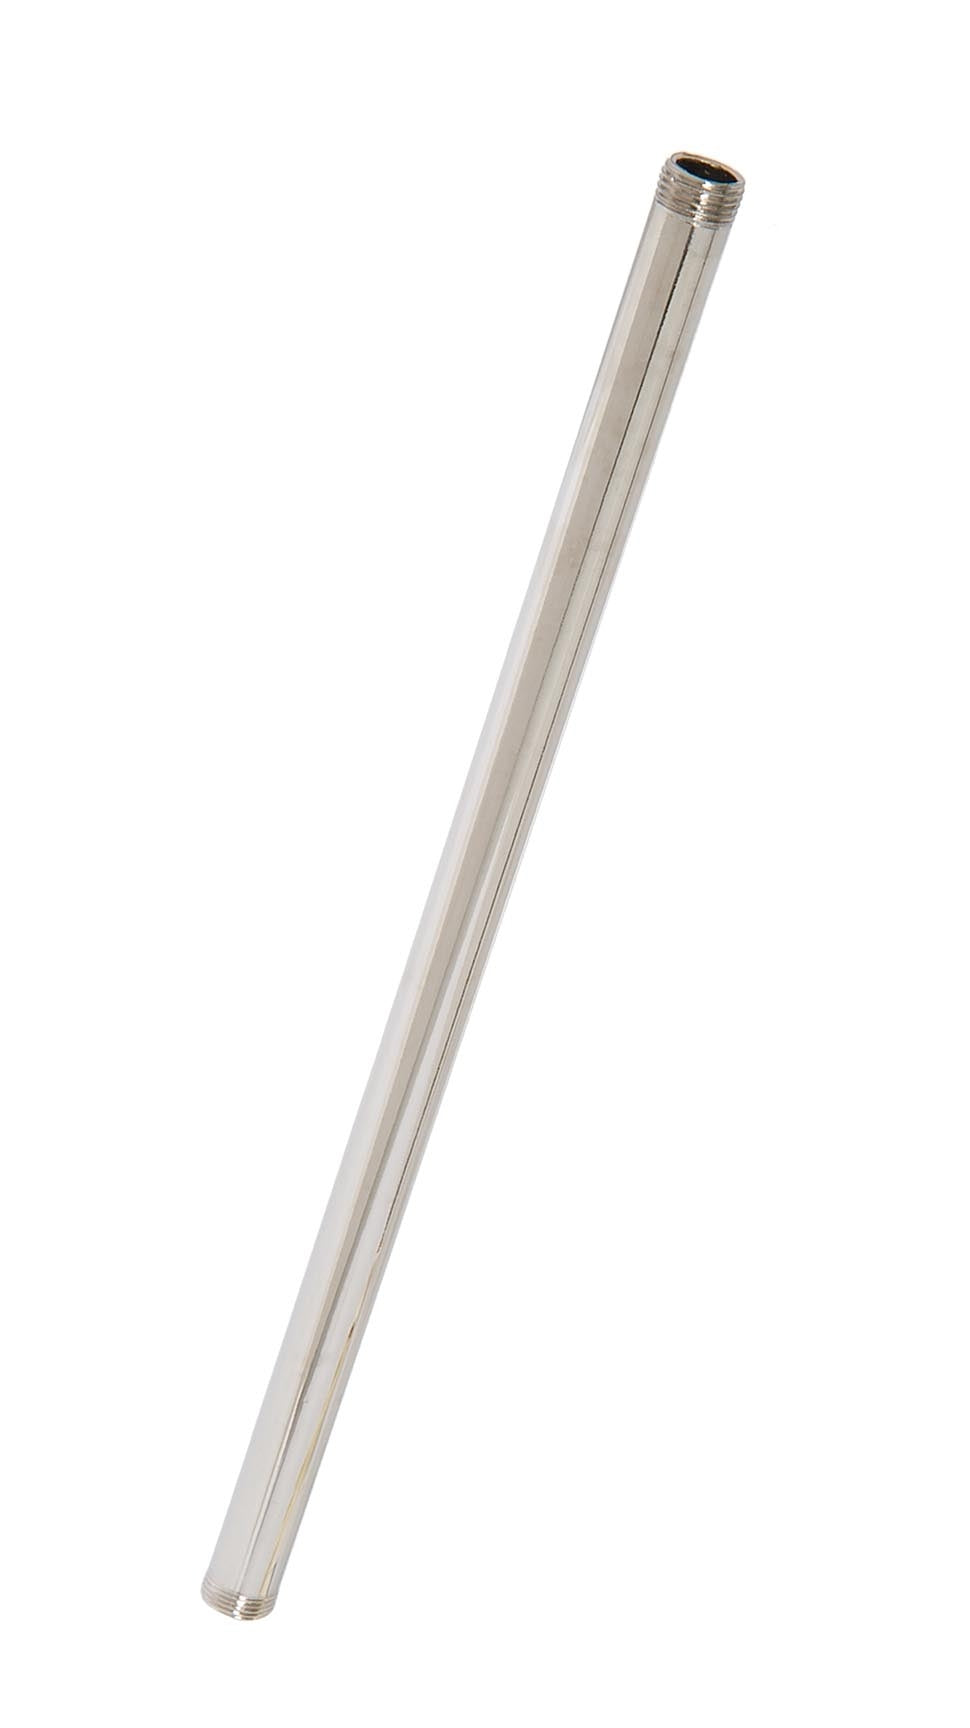 Polished Nickel Steel Fixture Stem Lamp Pipe, Both Ends Threaded 1/4 IP - Choice of Length